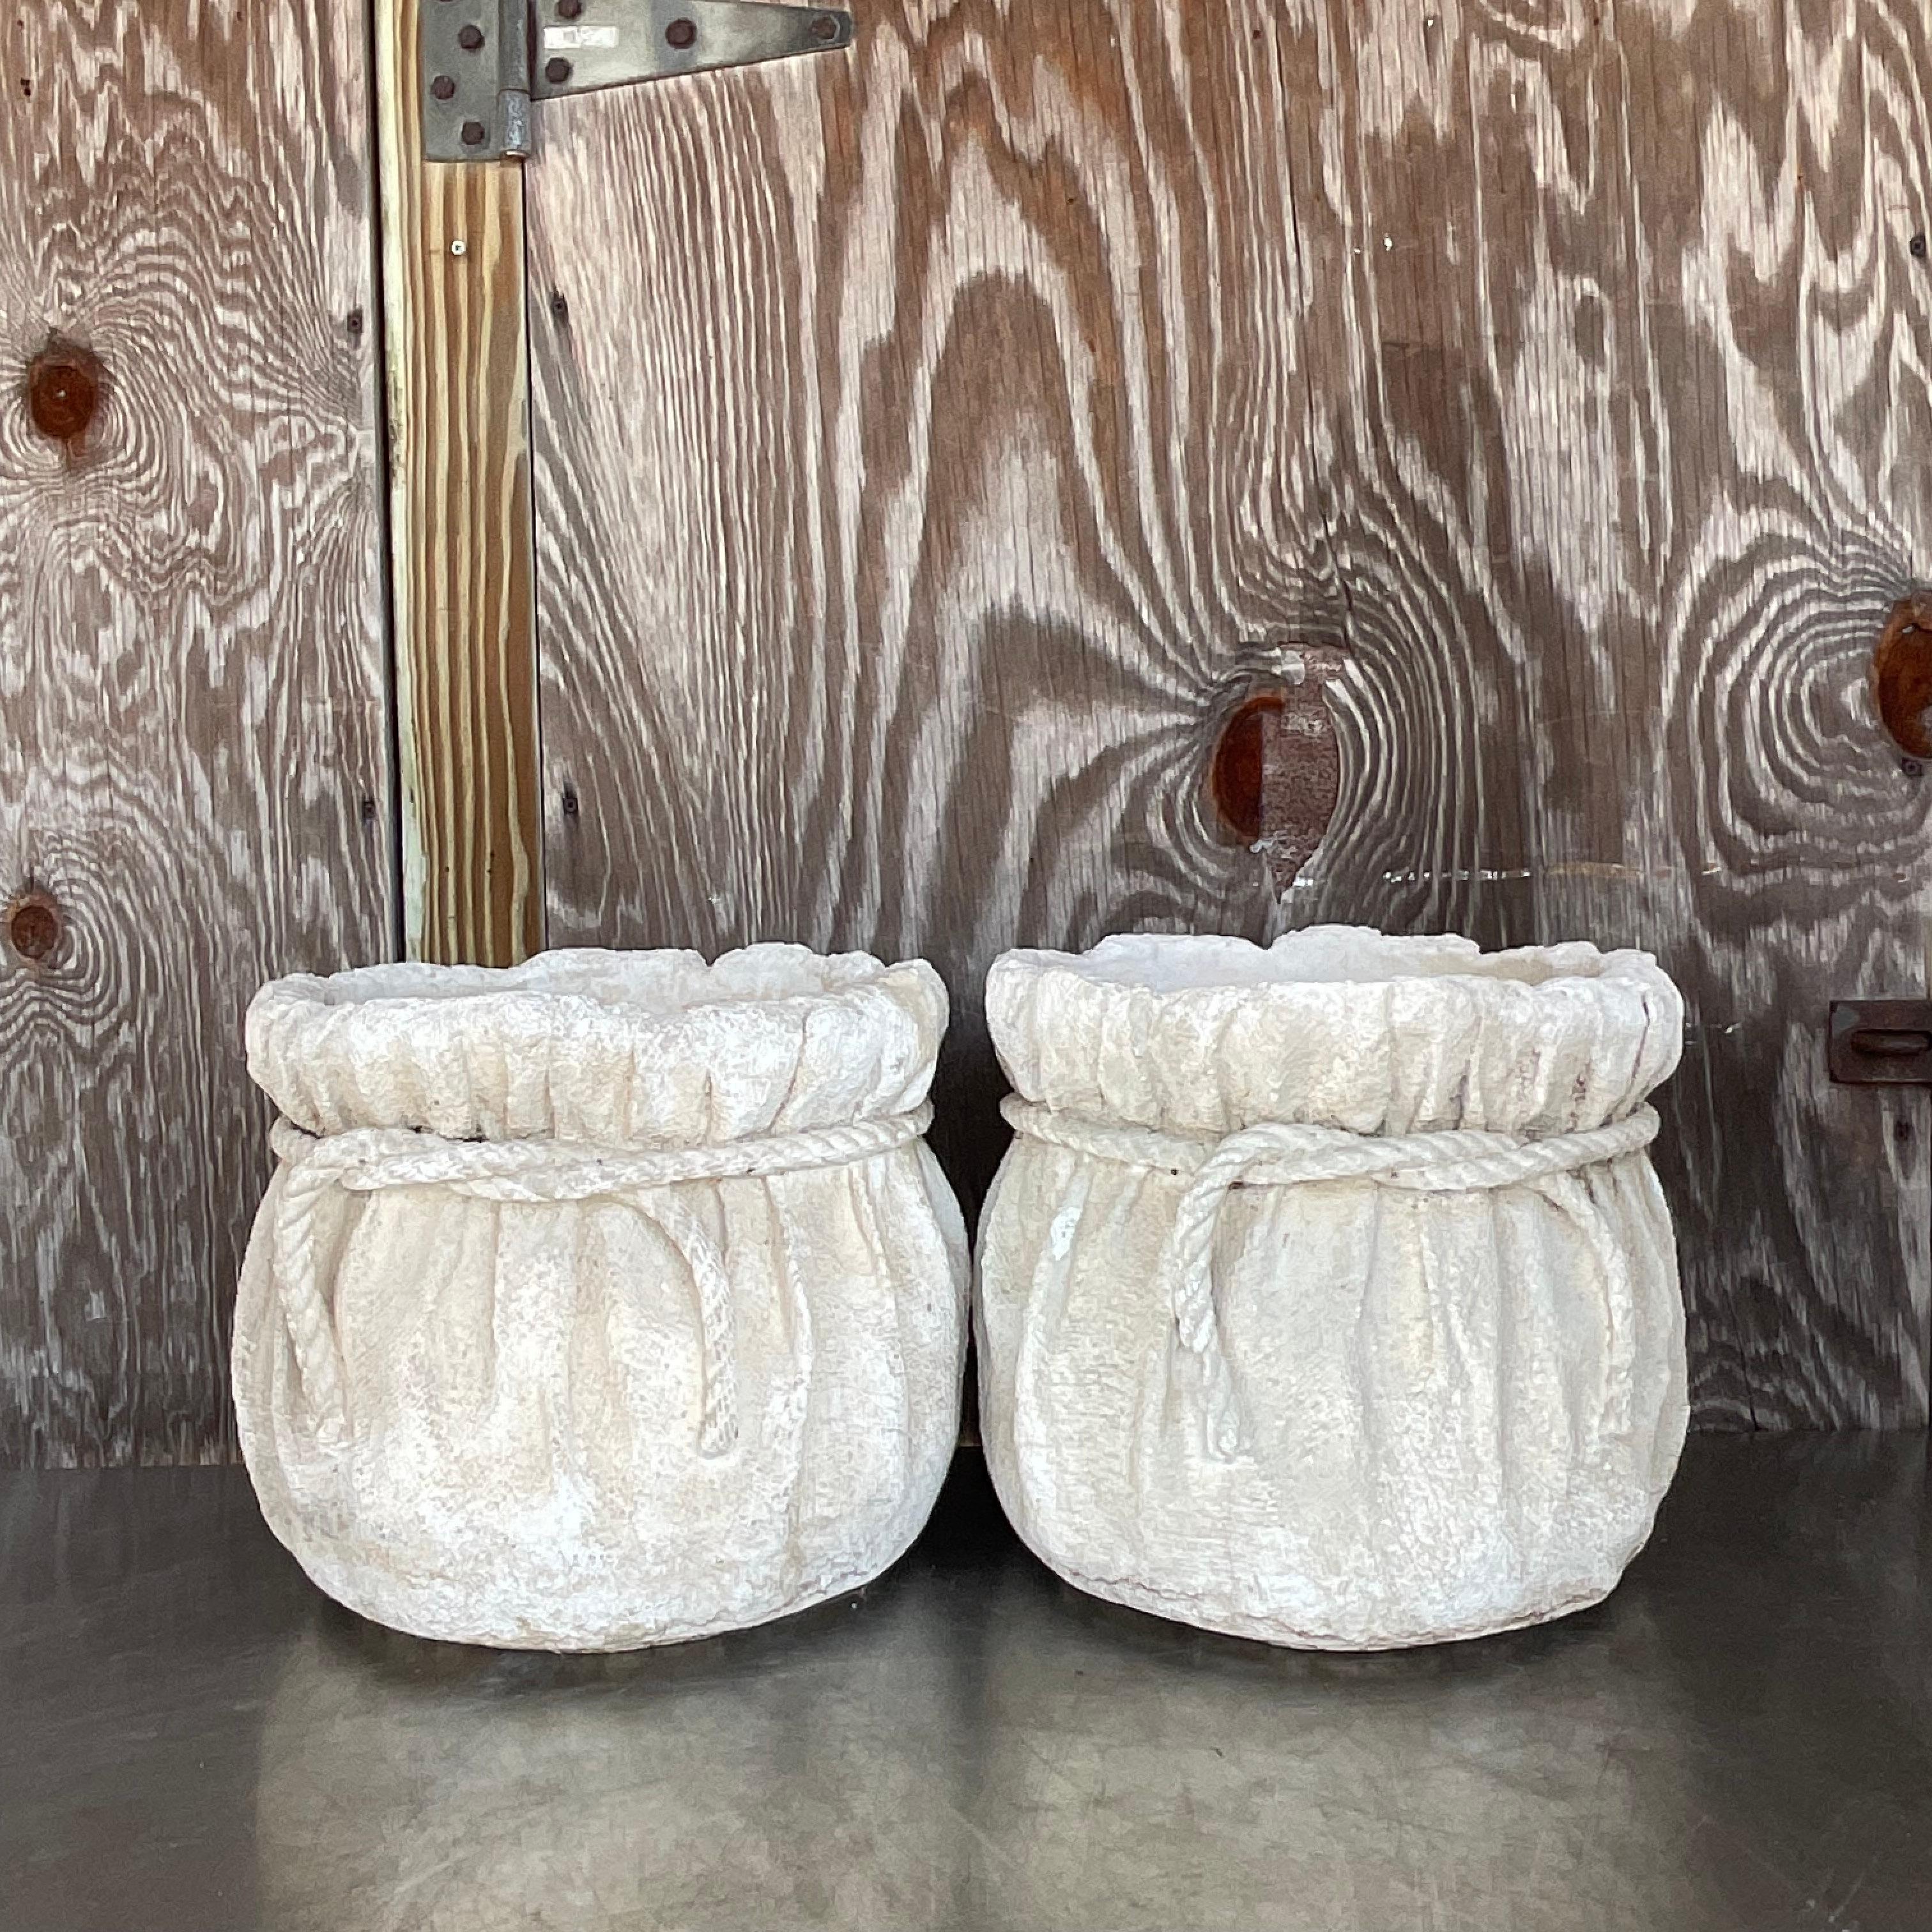 American Vintage Boho Painted Terra Cotta Rope Planters - a Pair For Sale